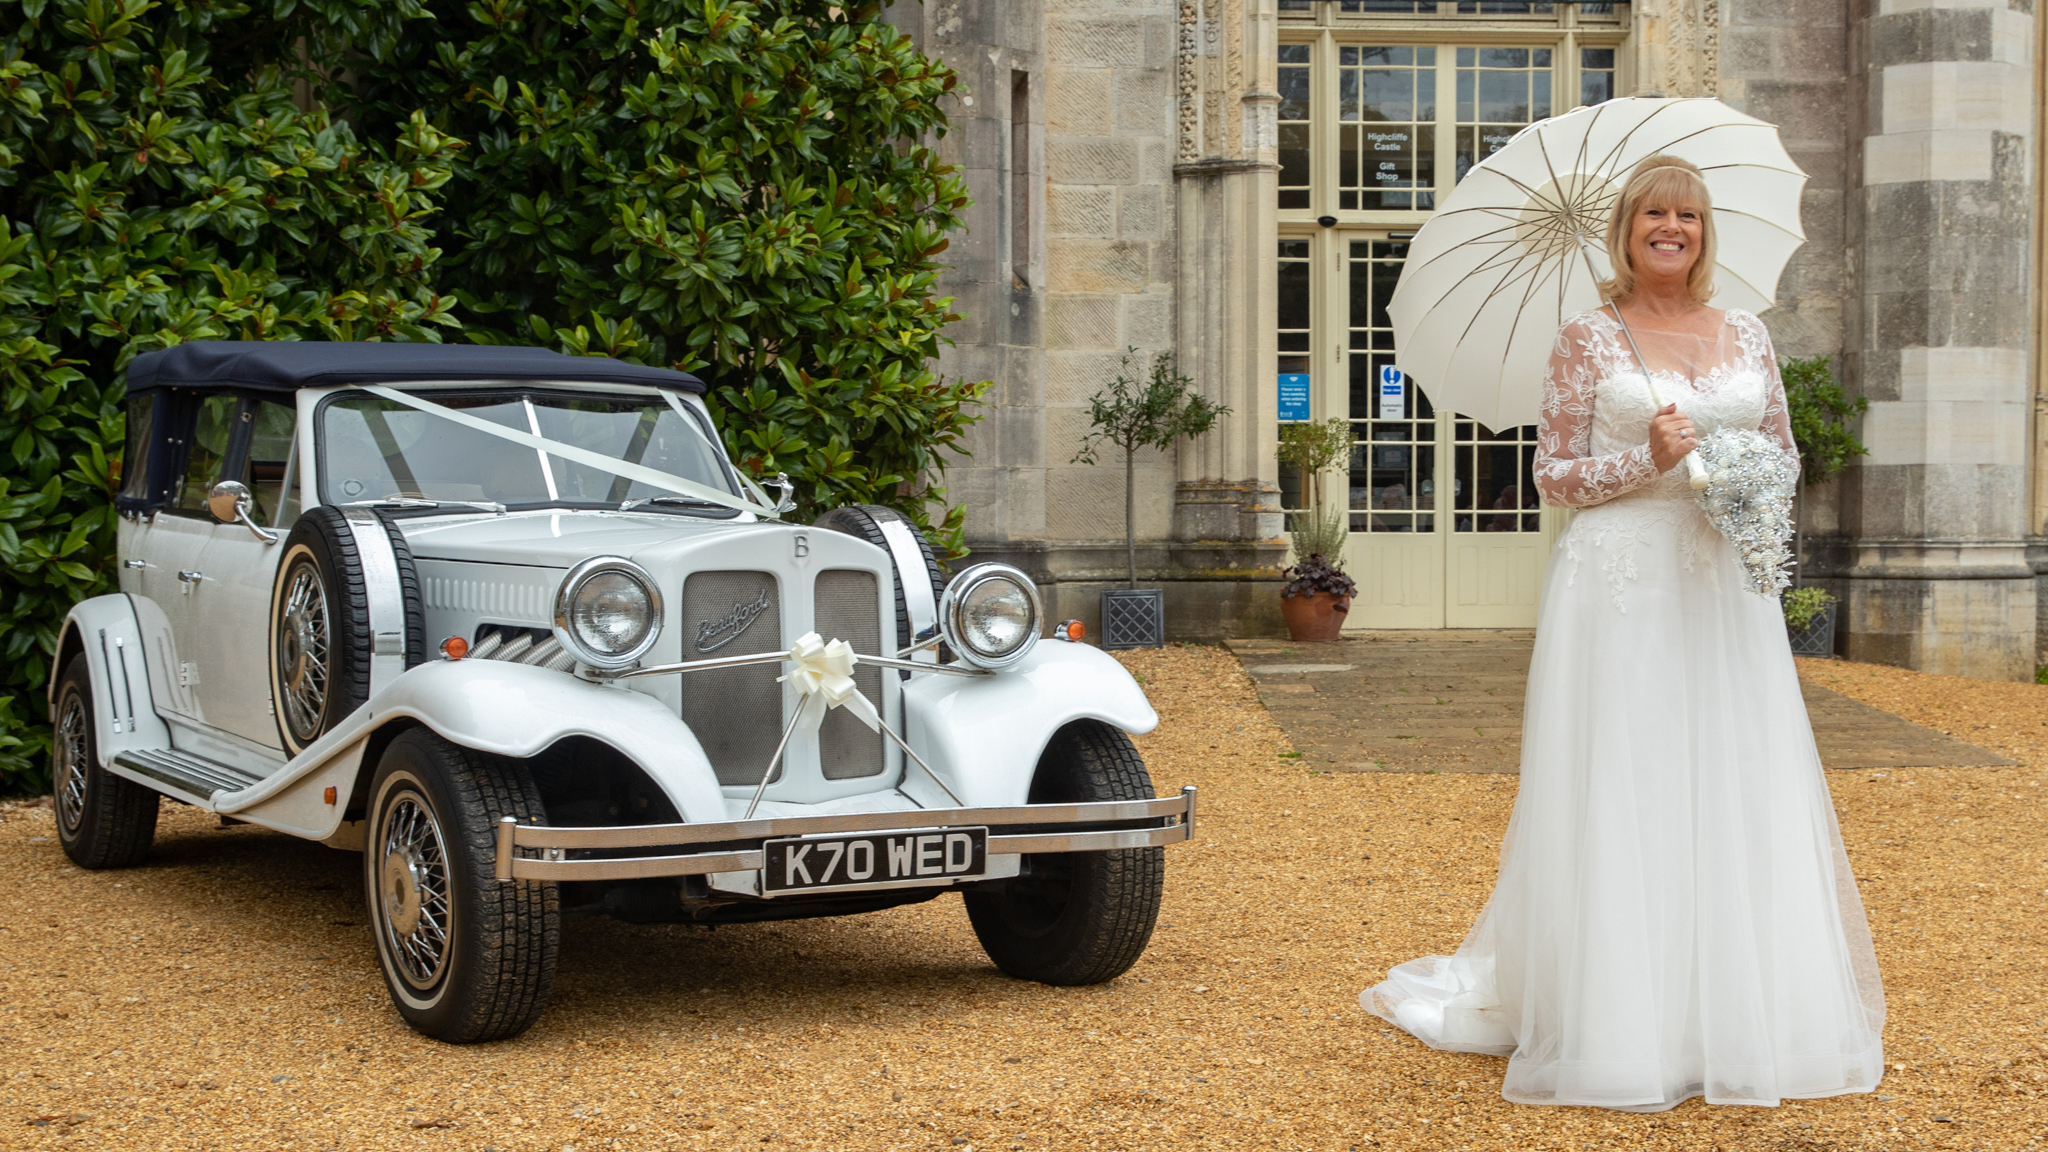 White vintage Beauford convertible with roof up decorated with white ribbon and bow at a local Ramsgate wedding. Smiling bride standing next to the vehicle with a white umbrella ho